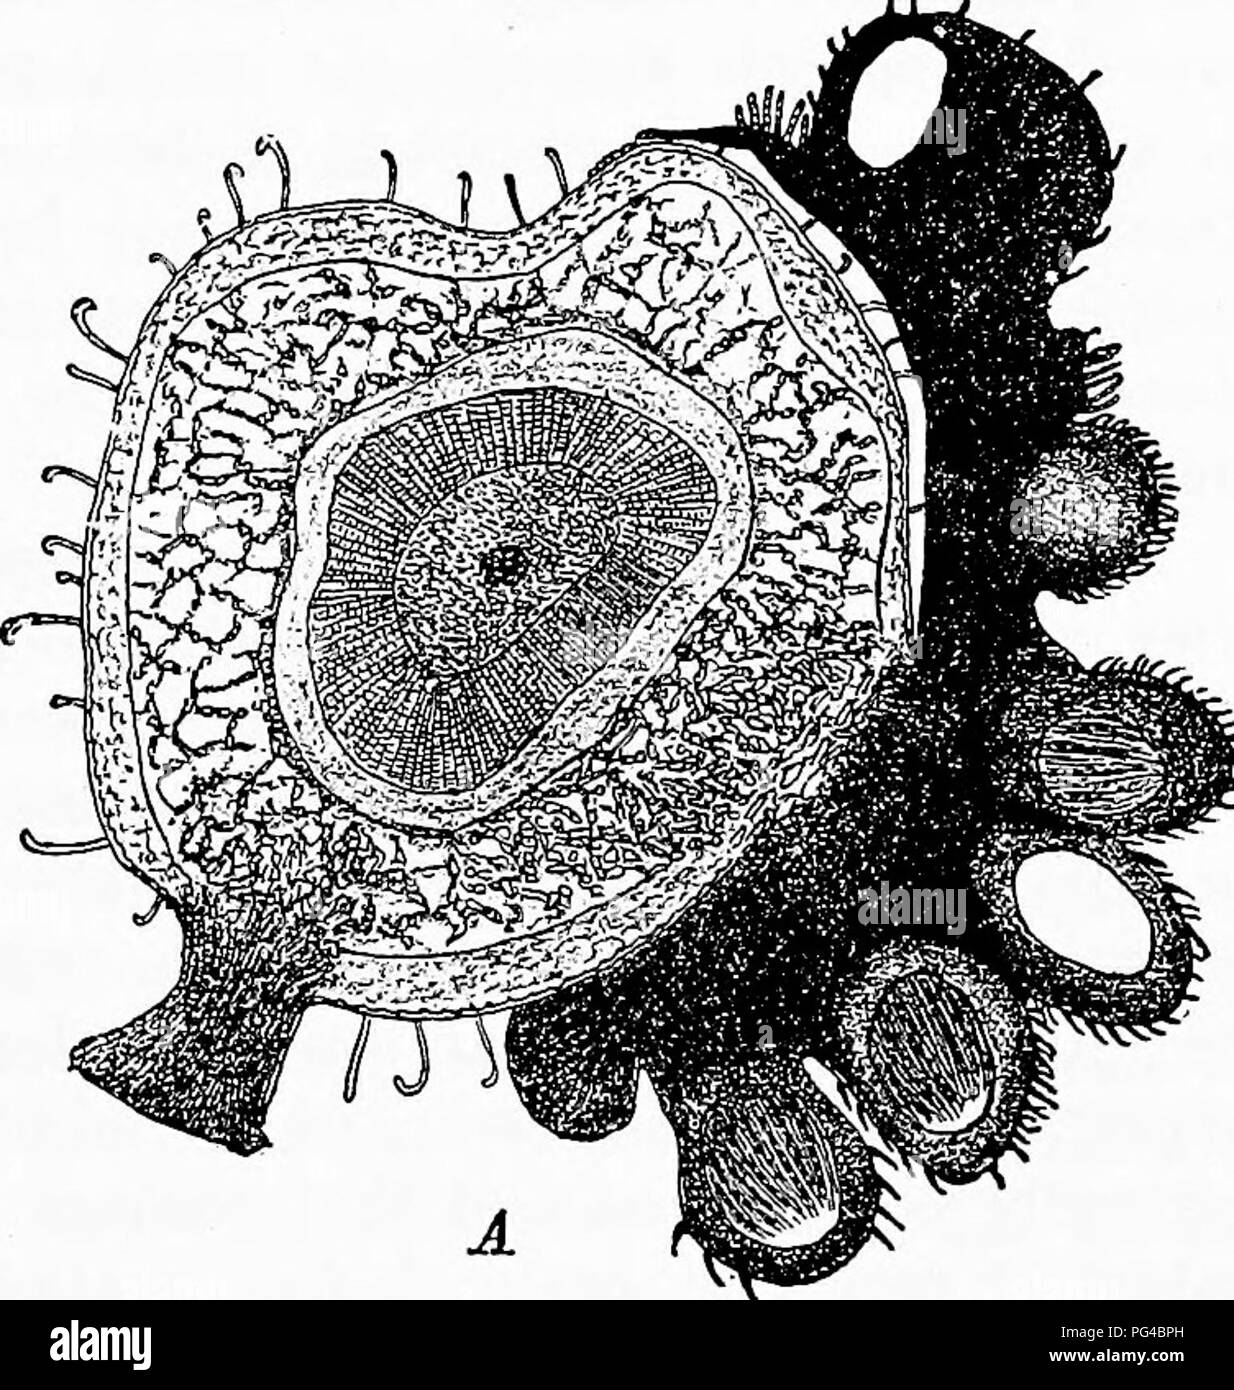 . Diseases of plants induced by cryptogamic parasites : introduction to the study of pathogenic Fungi, slime-Fungi, bacteria, &amp; Algae . Plant diseases; Parasitic plants; Fungi. Fig. 96.—Gibbera vaccinii. Isolated ascns with, eight spores; isolated hair from the outside of a perithecium. (v. Tubeuf del.) Fig. 95.—Gibbera vaccinii on Cowberry. The perithecia form black patches on the living leafy branch, as well as the dead brown one. (v. Tubeuf del.). ^-^ Fig. 97.—Gibbera vaccinii. Cross-section of Cowberry showing^ a patch of perithecia in section; the hairy perithecia contain paraphyses a Stock Photo